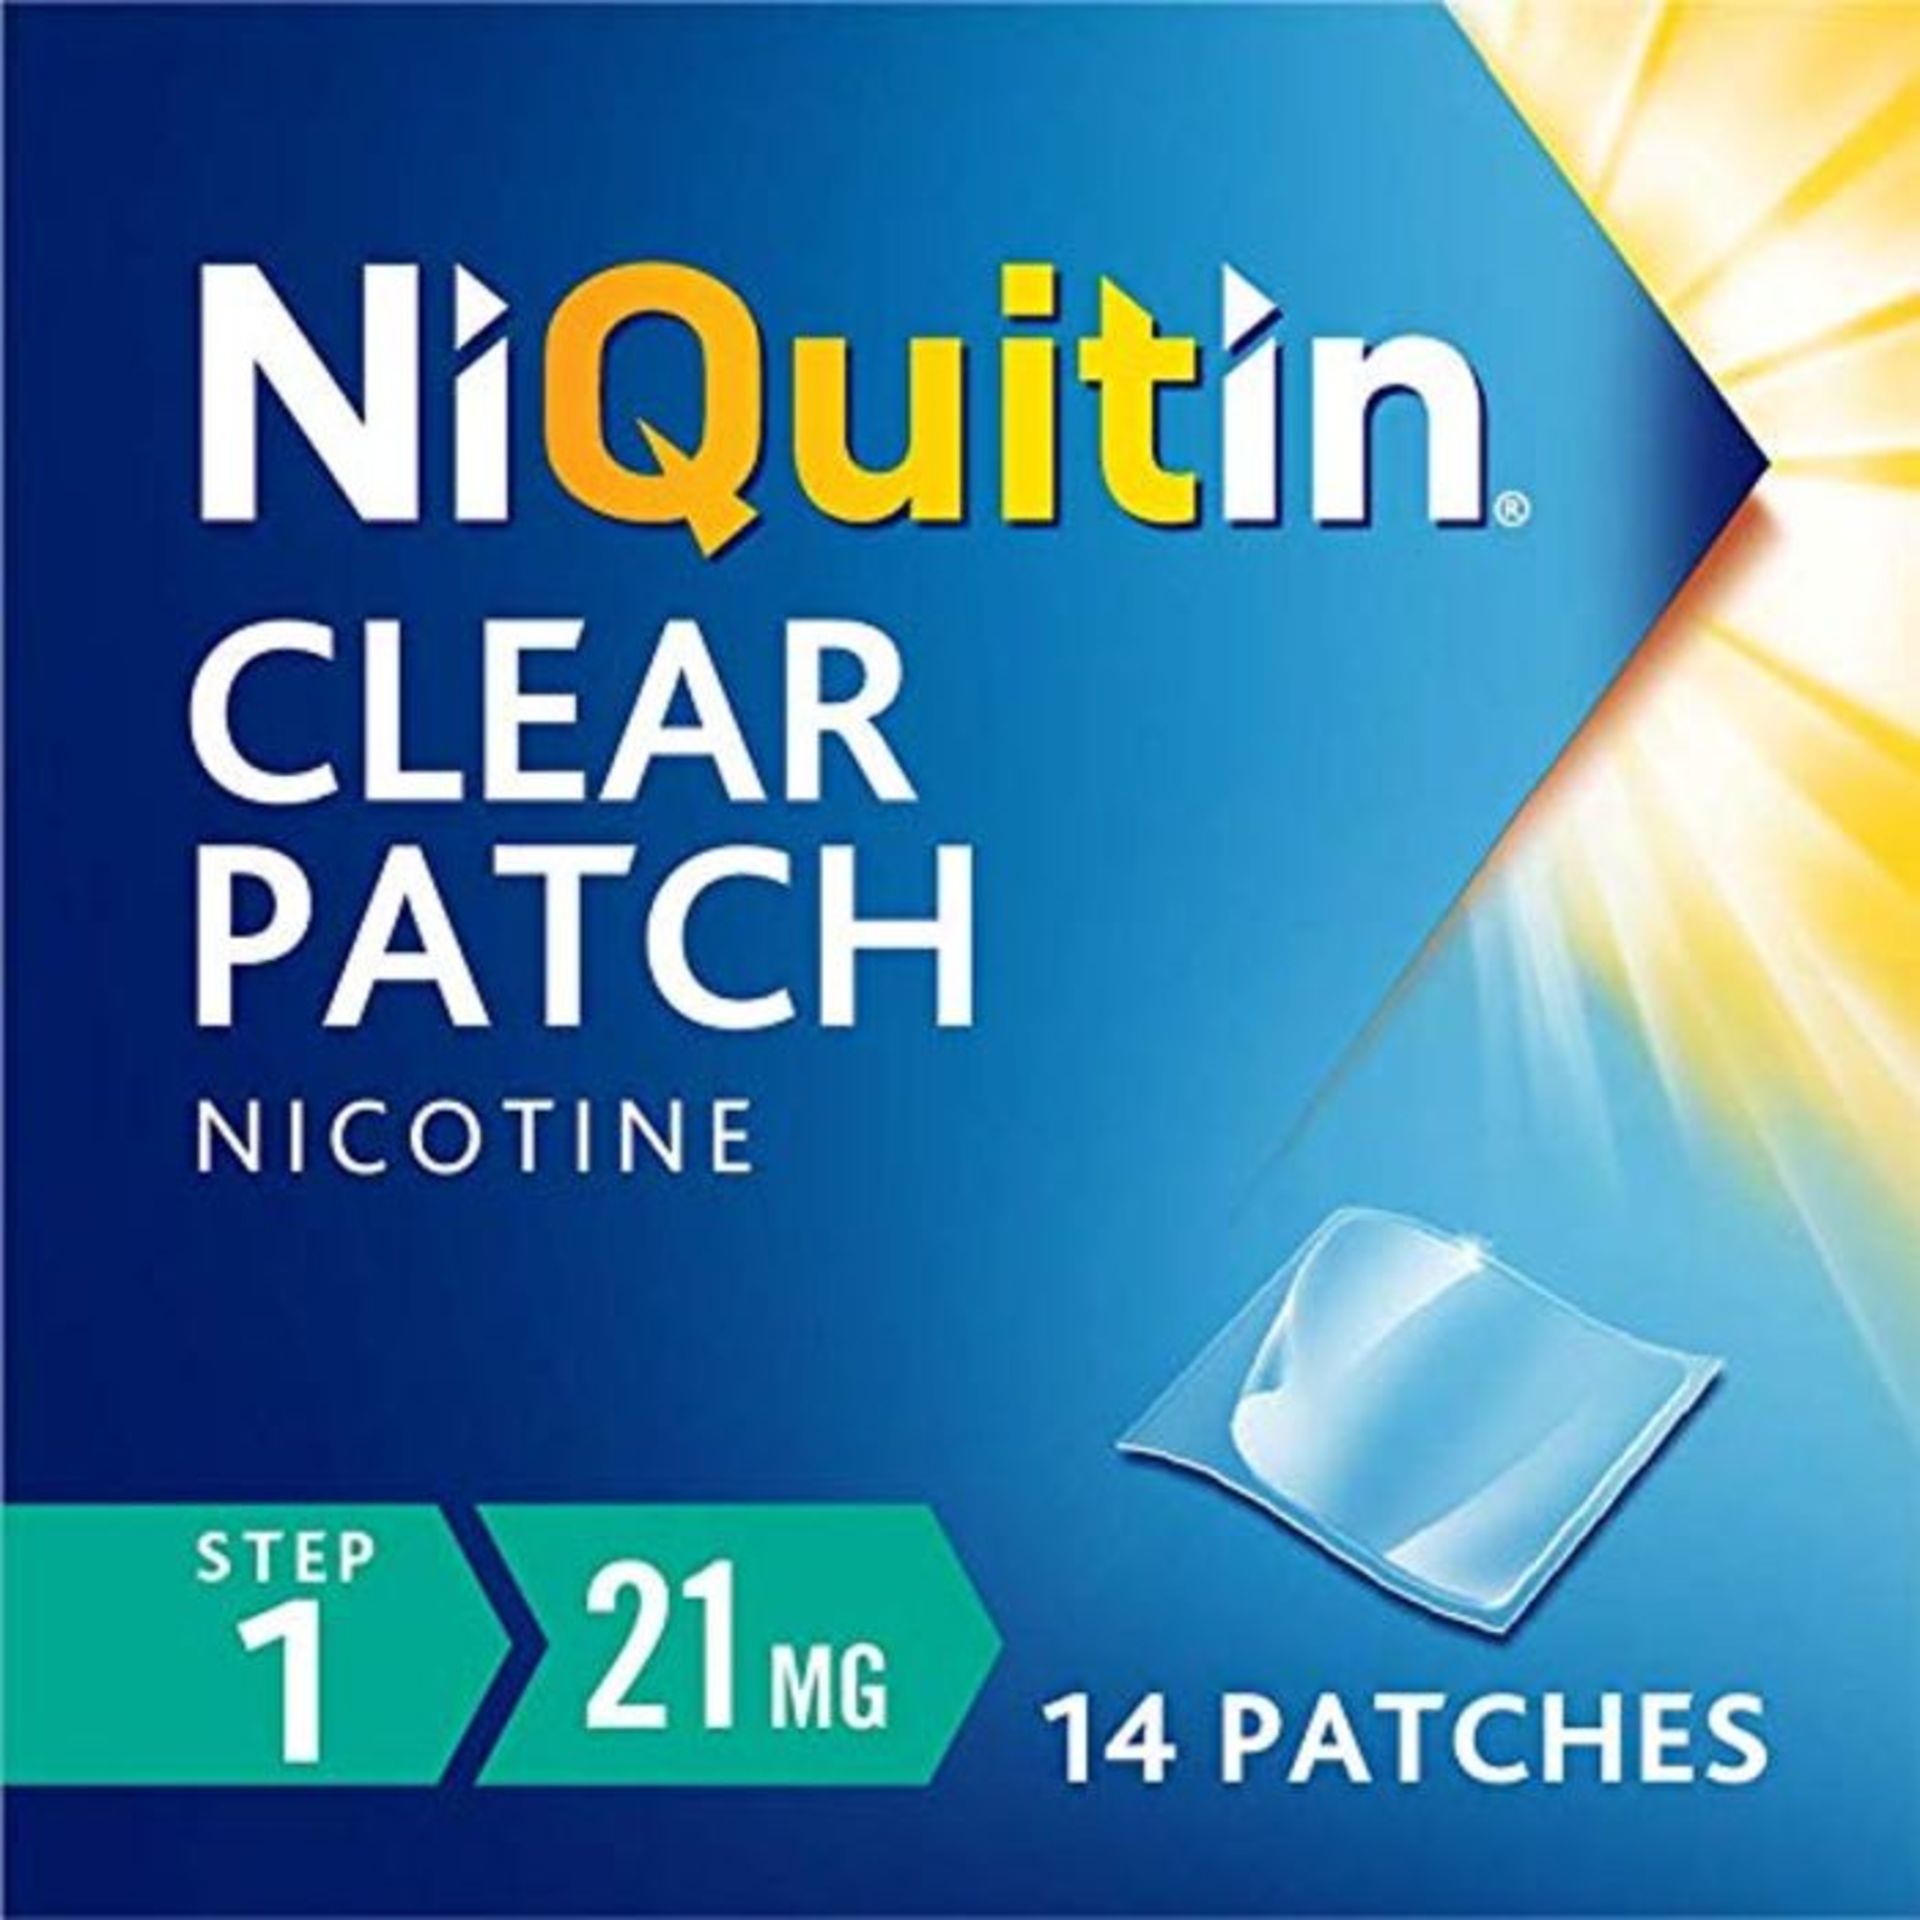 NiQuitin Clear 24 Hour 14 Patches Step 1, 21 mg - 2 Week Kit